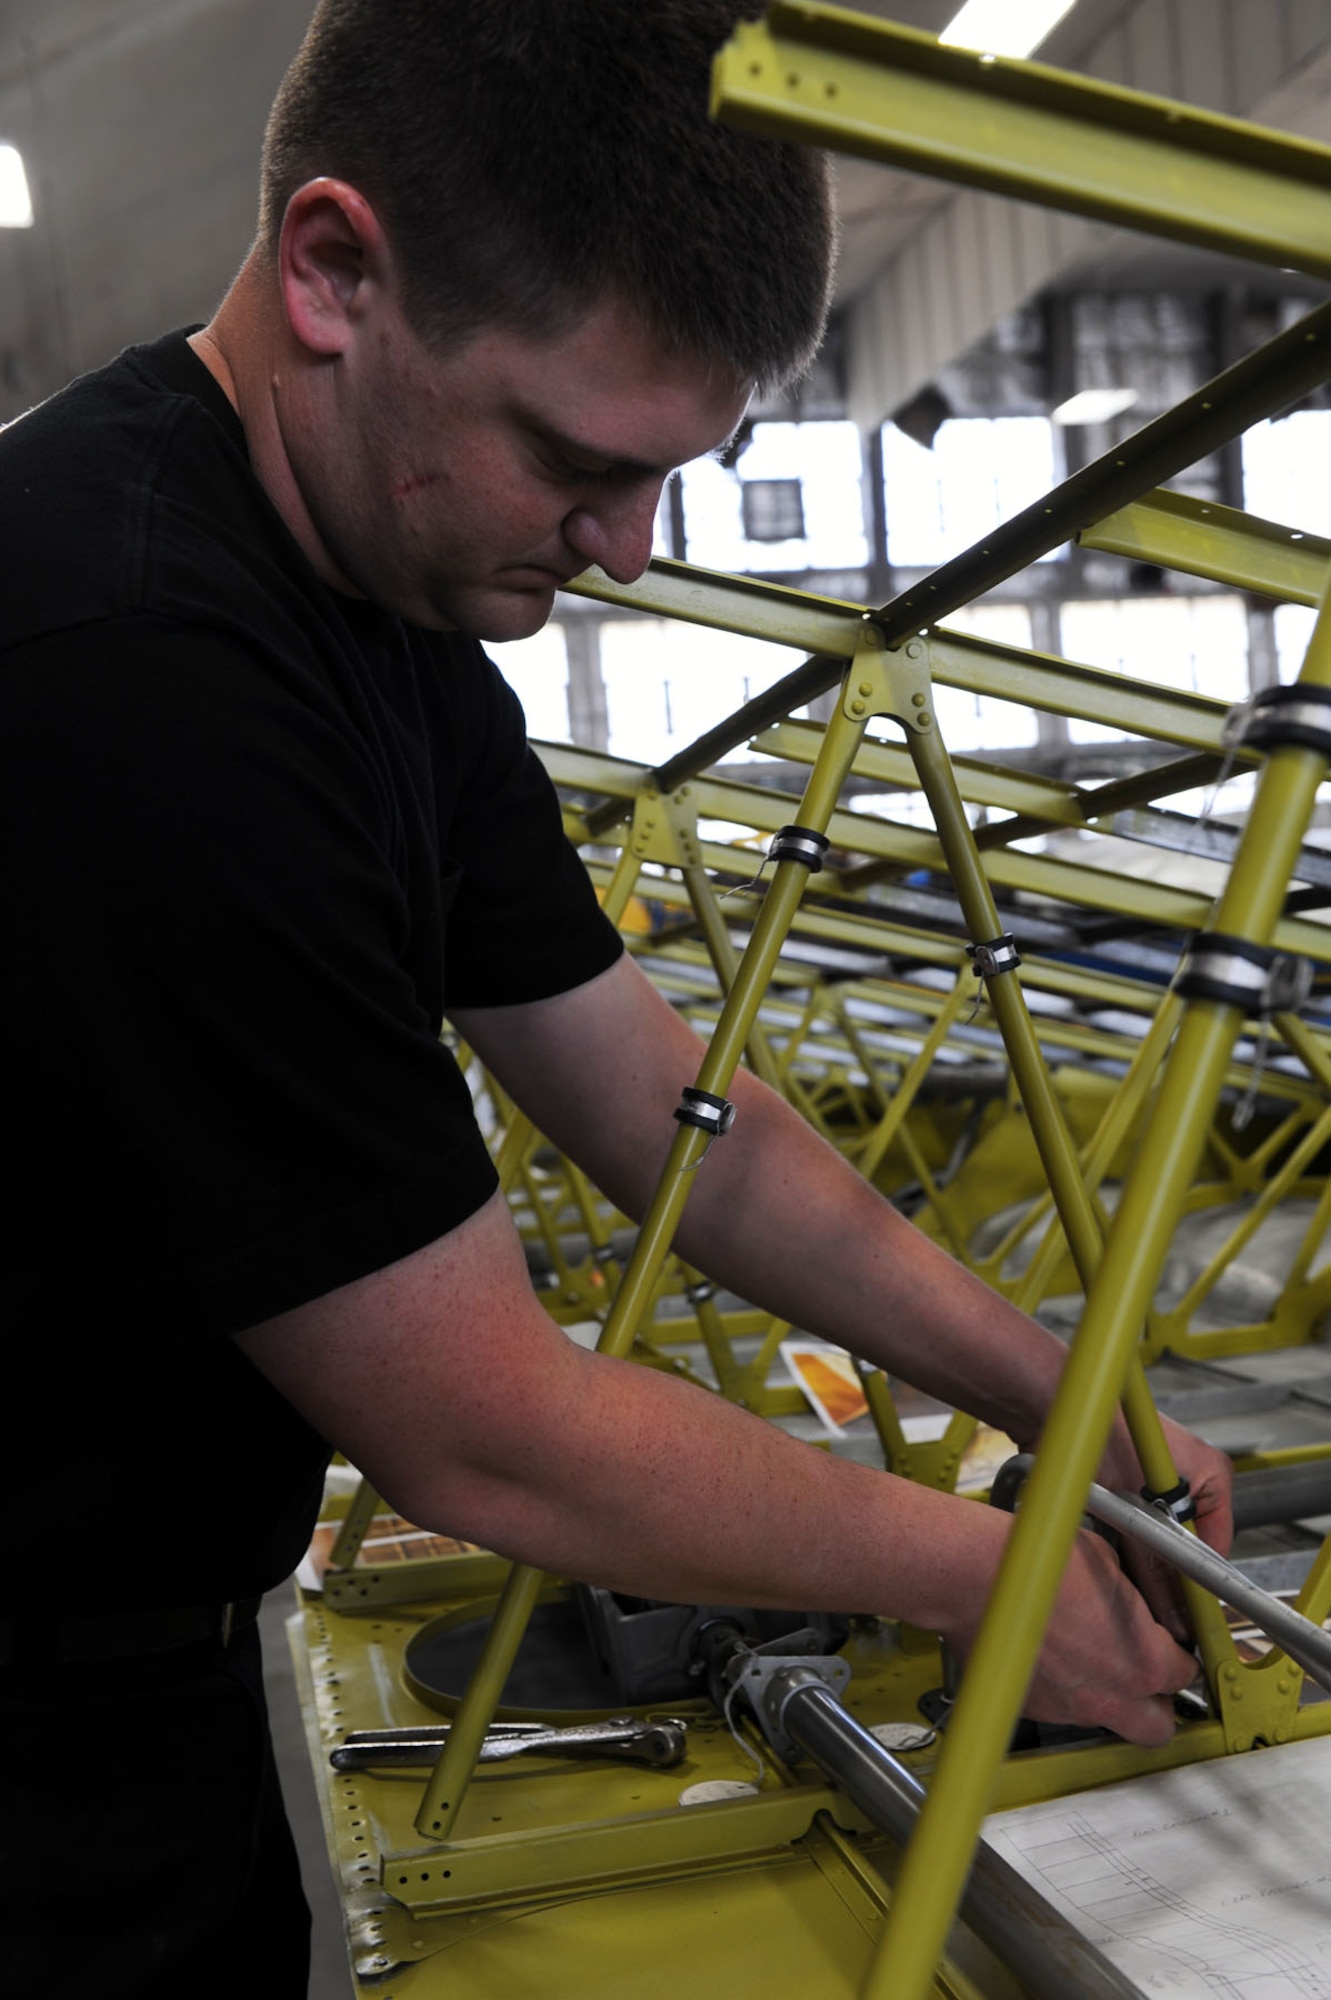 DAYTON, Ohio (04/2010) -- Restoration specialist Nick Almeter works on the B-17F "Memphis Belle" in the Restoration Hangar at the National Museum of the U.S. Air Force. (U.S. Air Force photo/Master Sgt. William Greer)